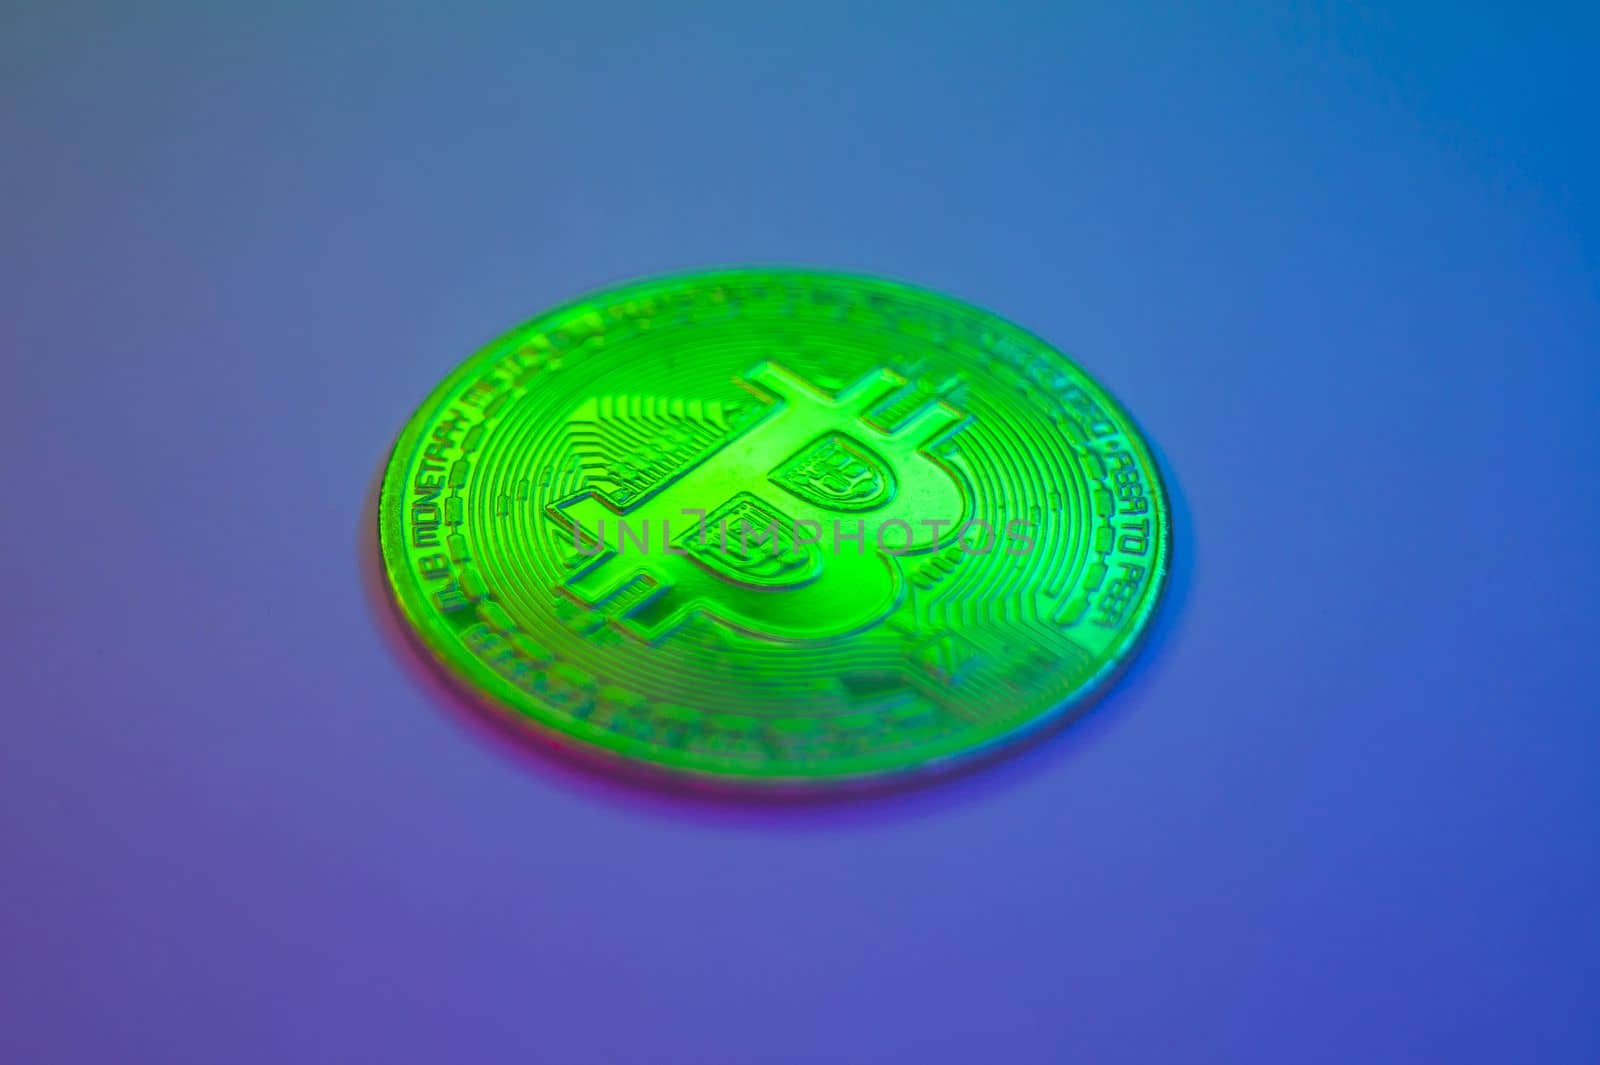 Crypto currency green coin with bitcoin symbol on isolated on black background. Bitcoin Coin on colored background. Bitcoin cryptocurrency. Cryptocurrency Coin Concept. by mr-tigga